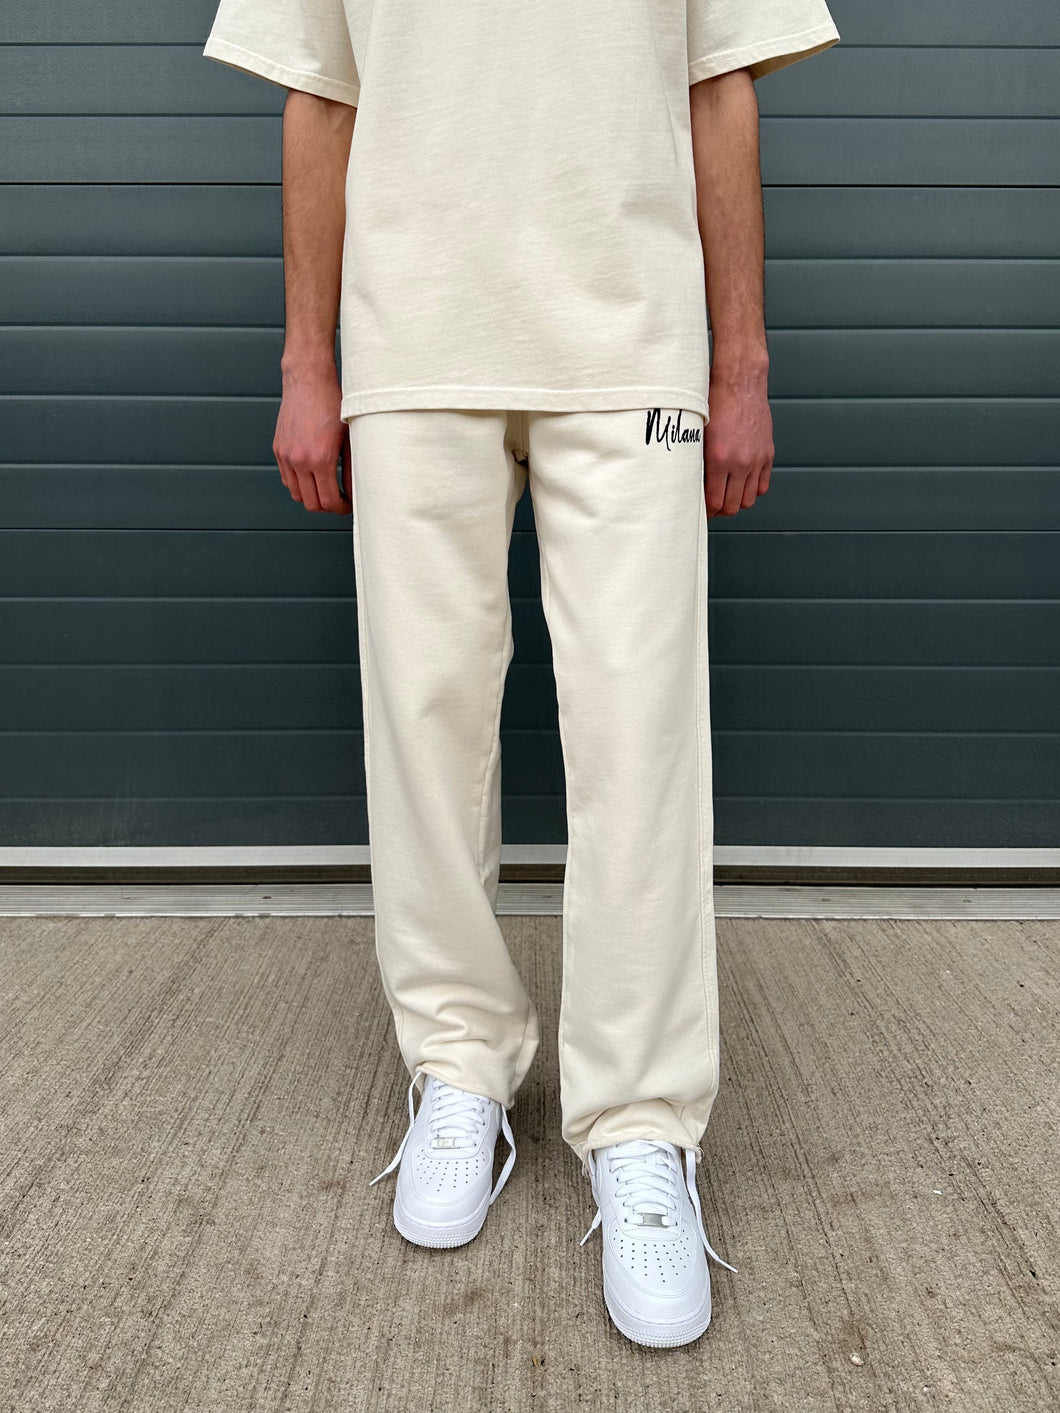 Cream Essential Relaxed Sweatpants.